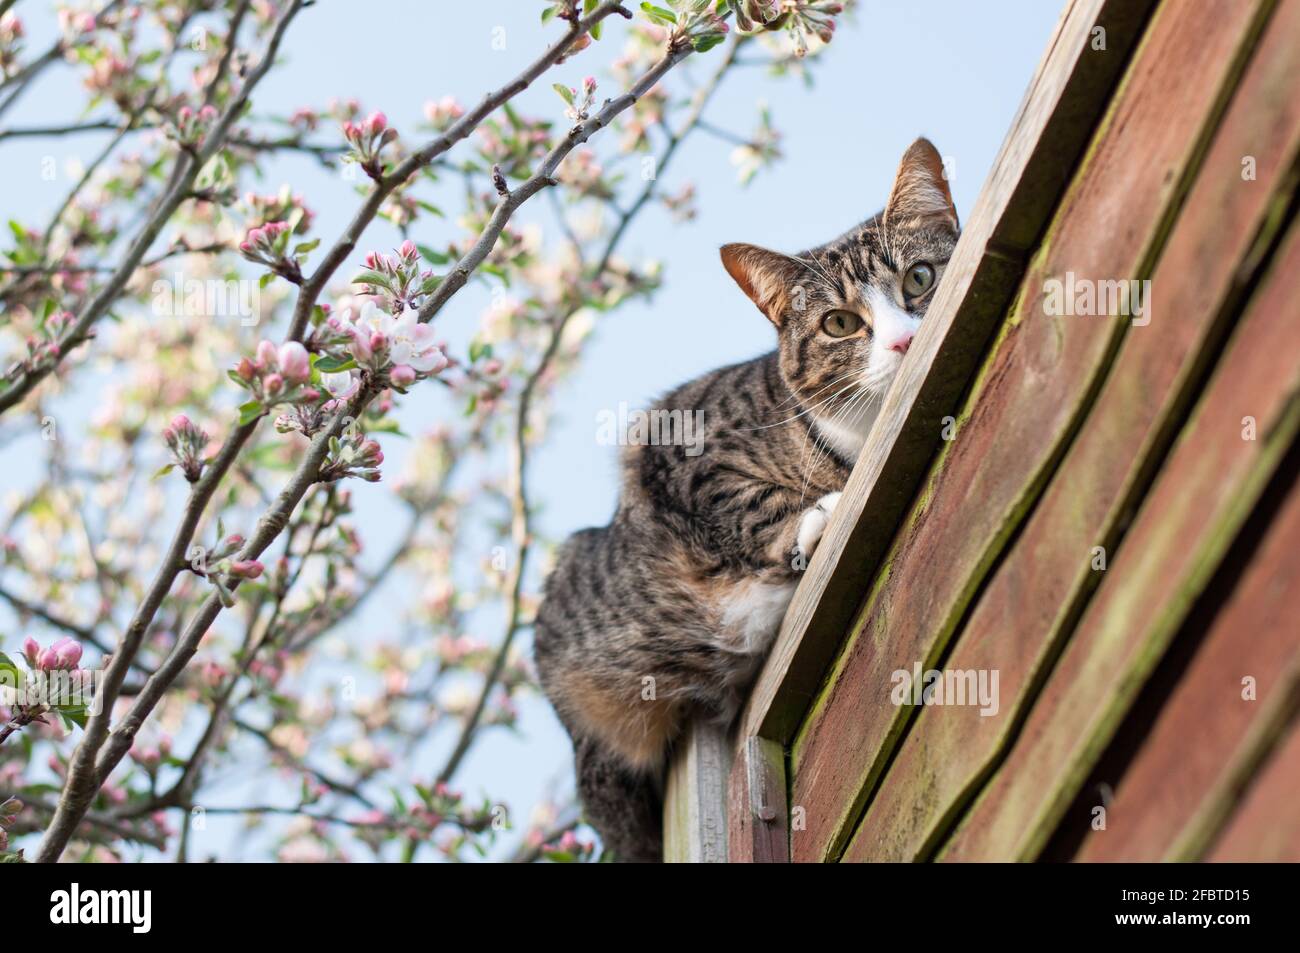 A female short-haired tabby cat (Felis catus) sitting on a wooden fence next to a blossoming apple tree (Malus domestica) Stock Photo